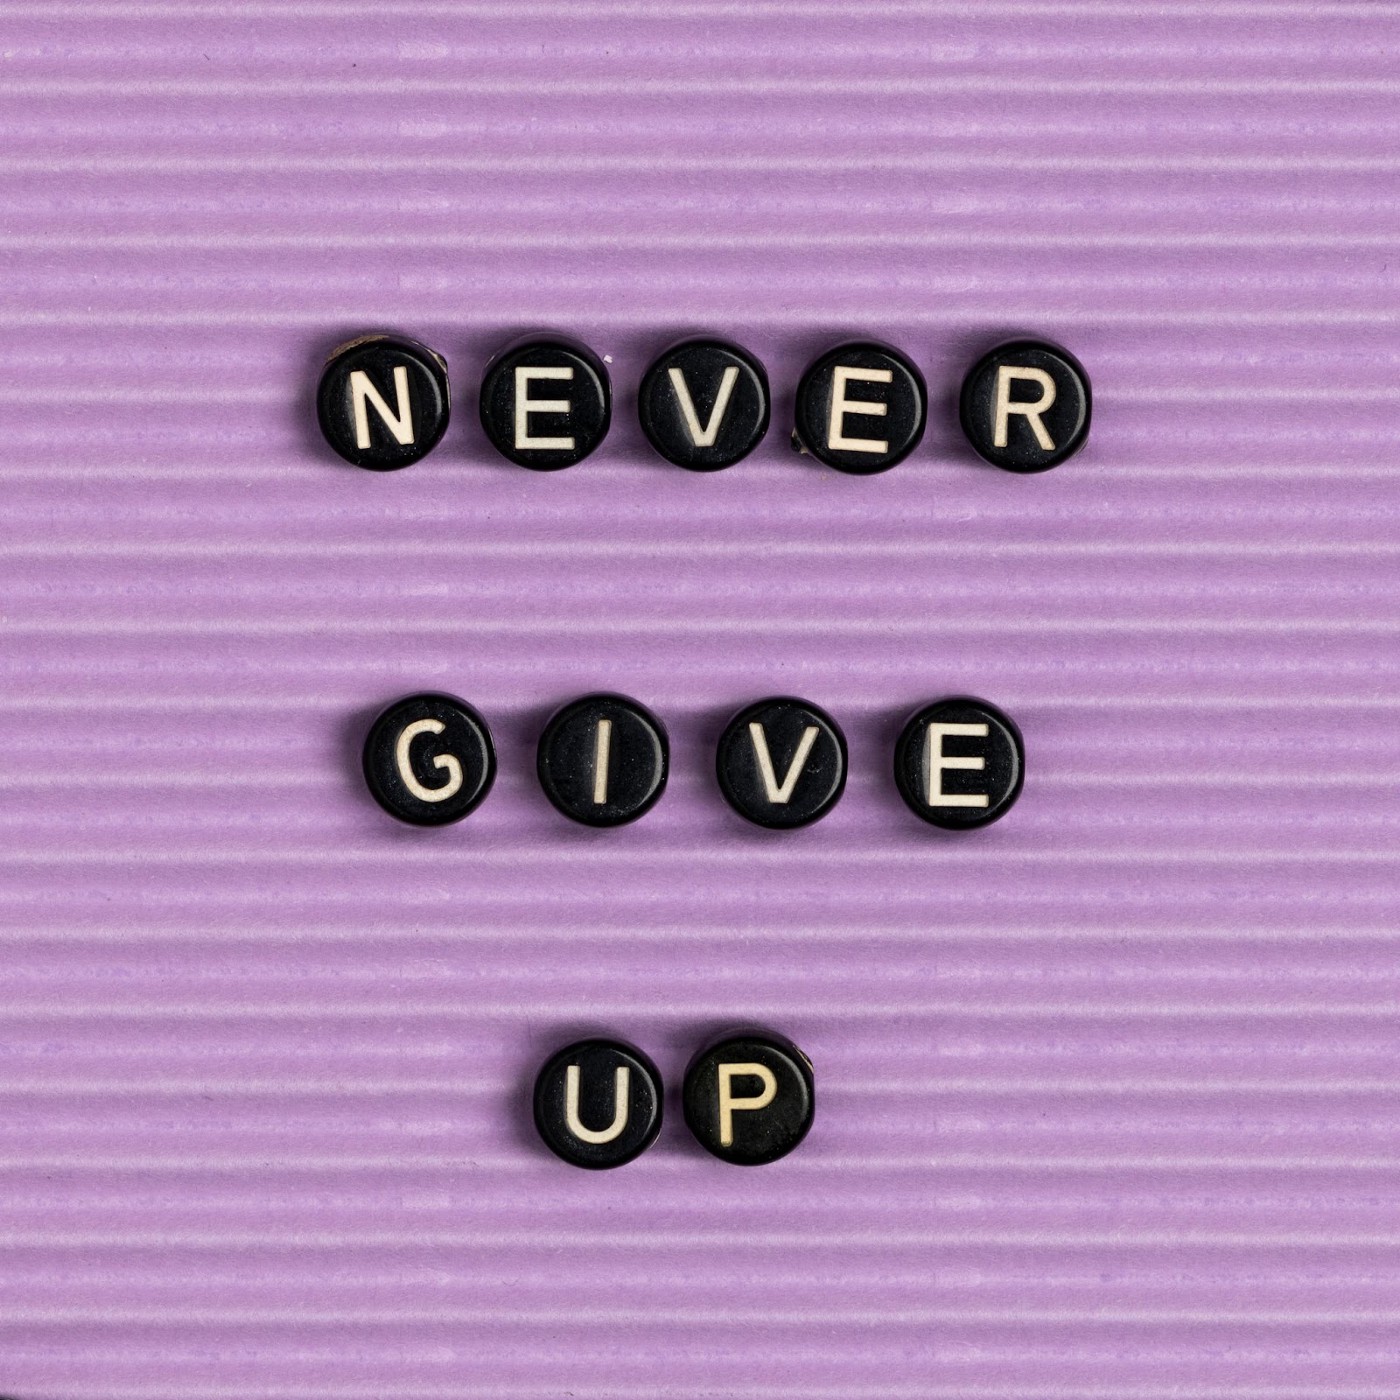 “NEVER GIVE UP” written on black beads.